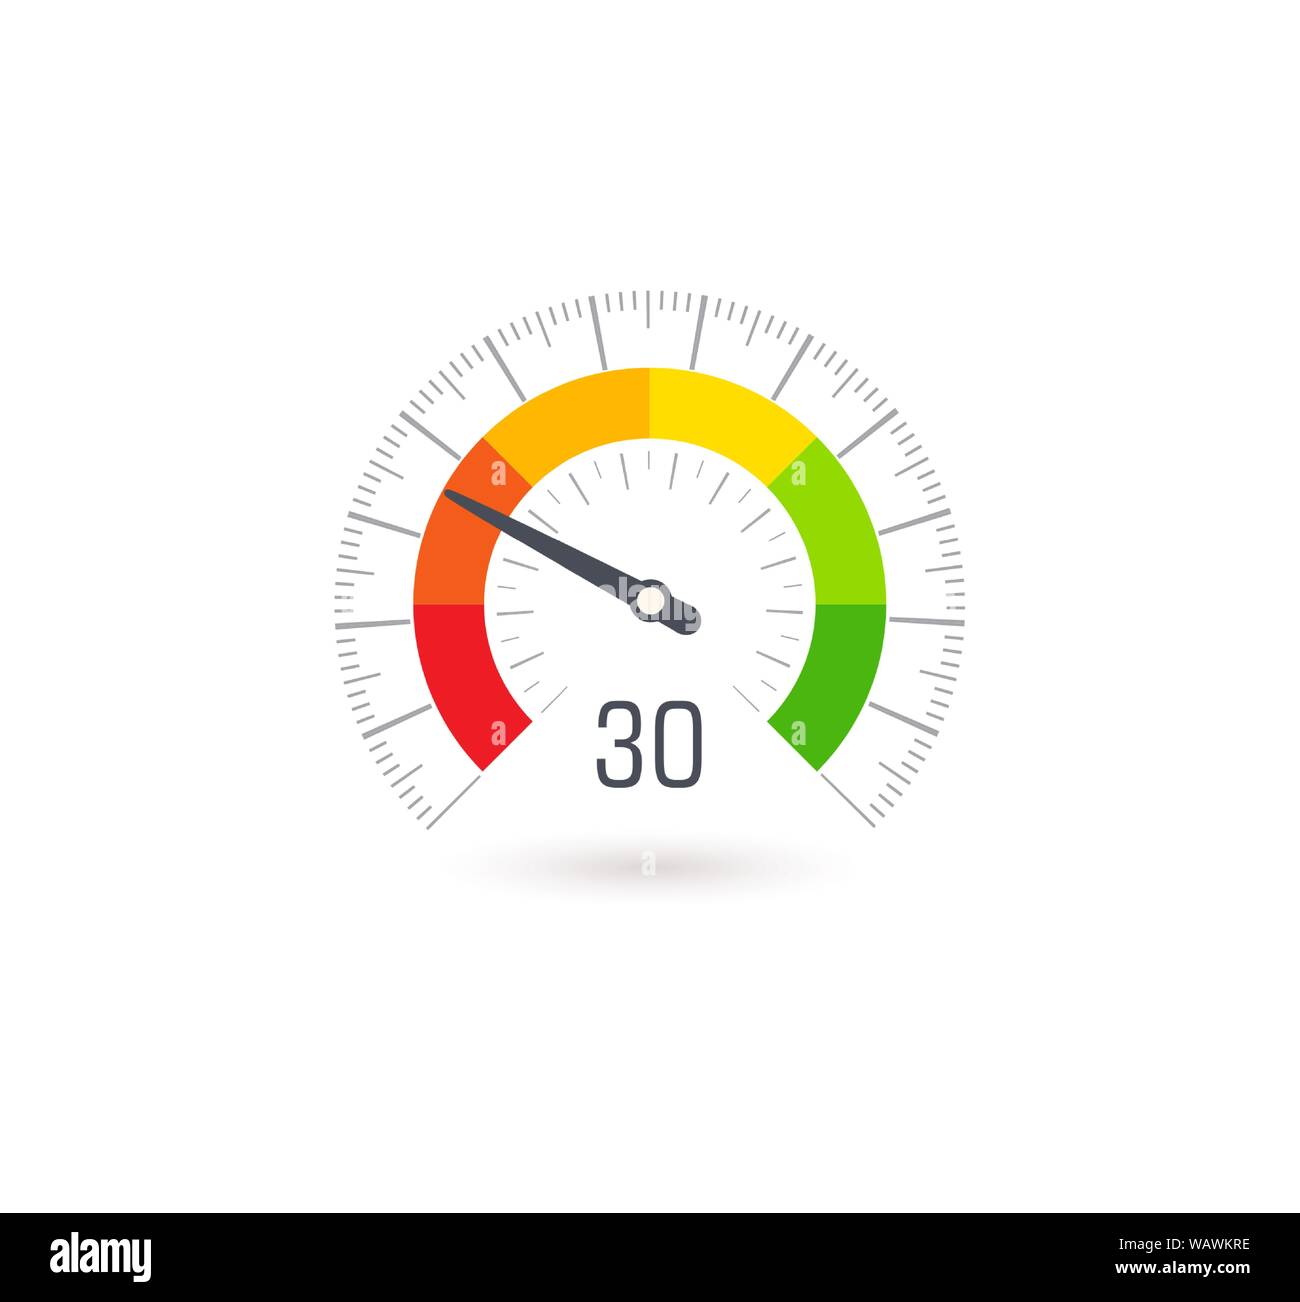 Business meter, indicator icon with colorful segments. Infographic for business rating and quality control, vector illustration. Stock Vector